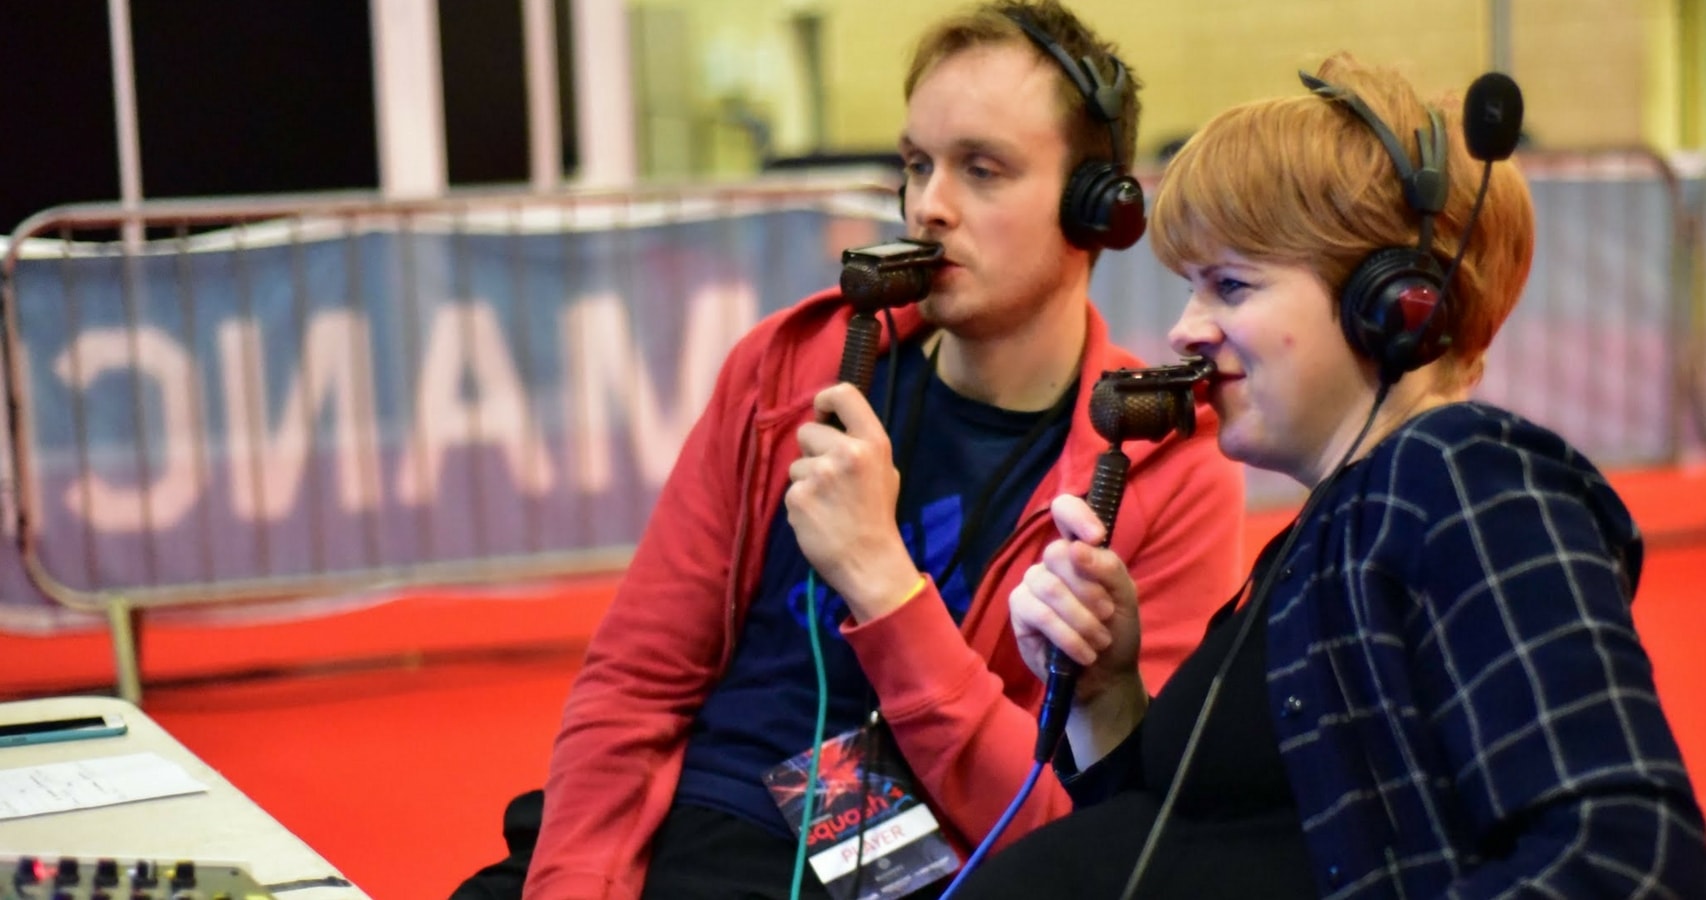 Vanessa Atkinson commentating at the National Squash Championships with her husband James Willstrop